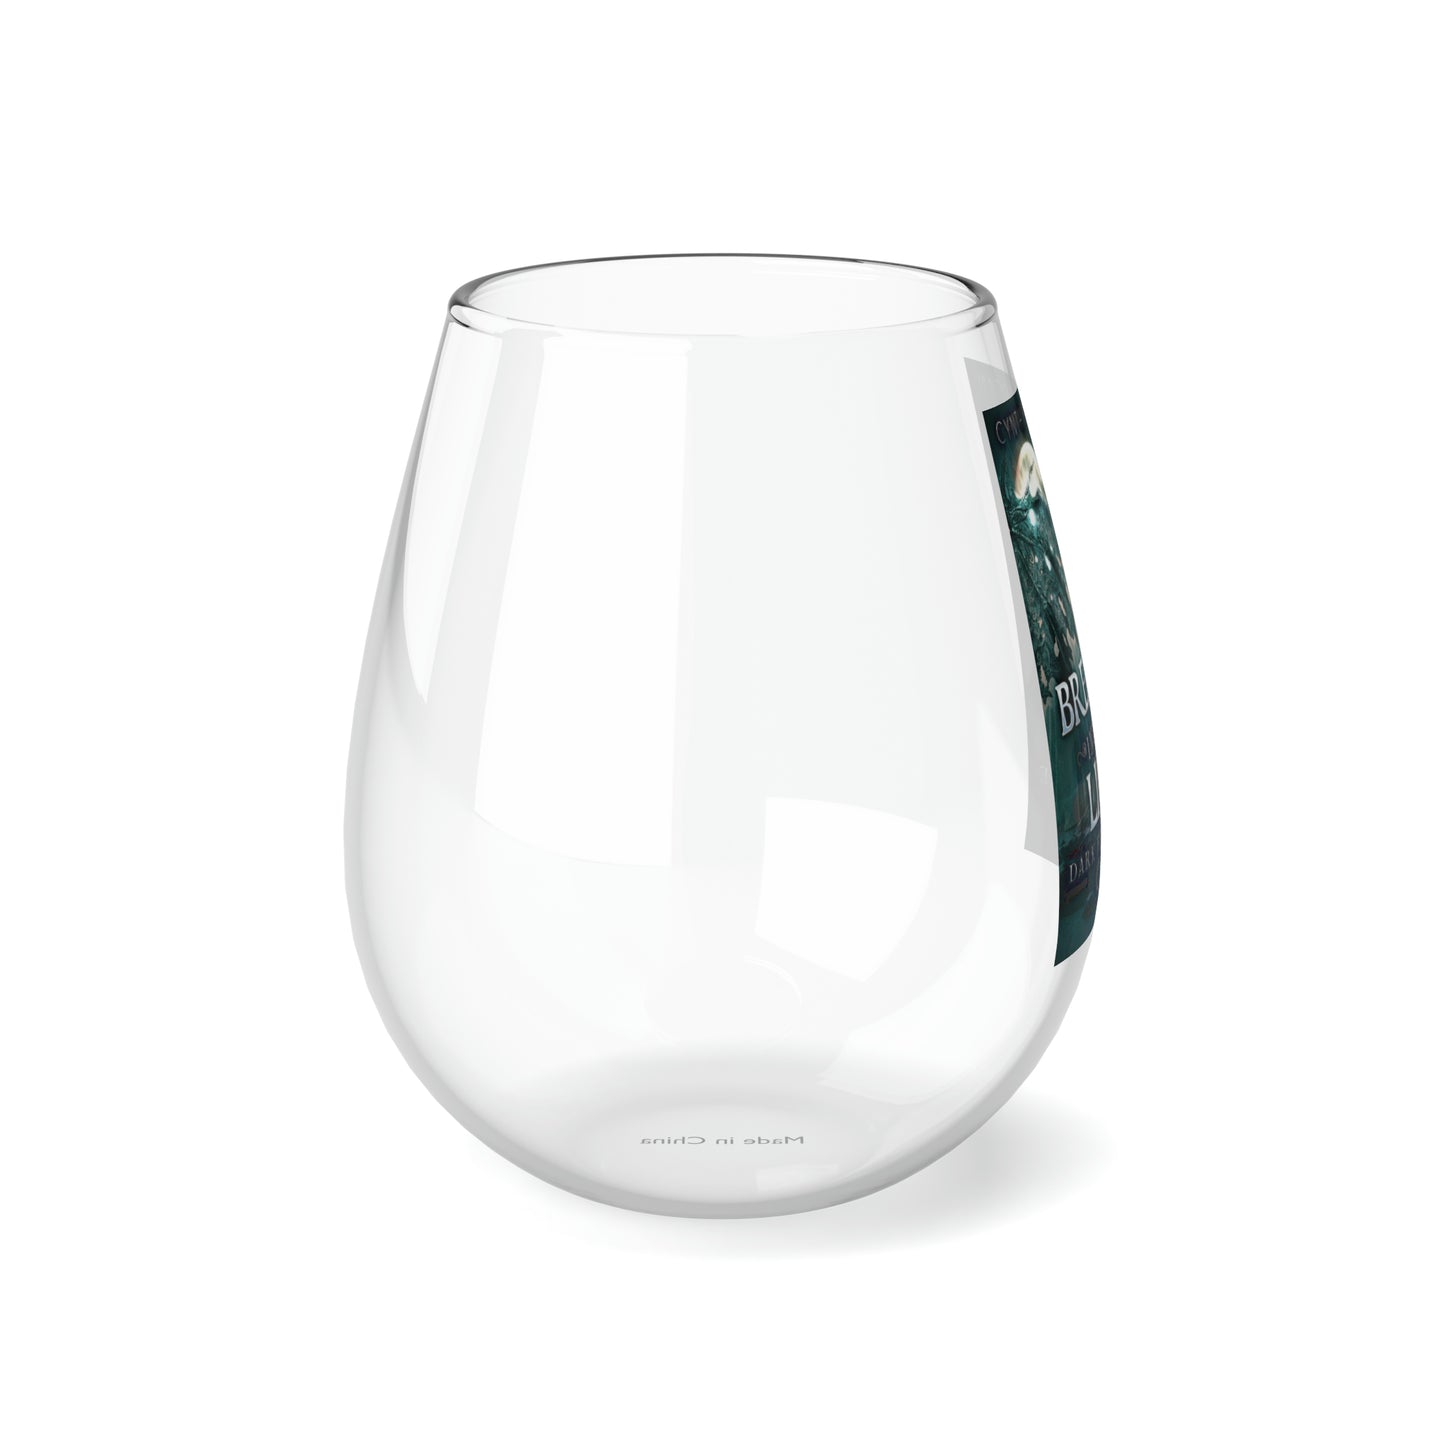 Breaking Into The Light - Stemless Wine Glass, 11.75oz